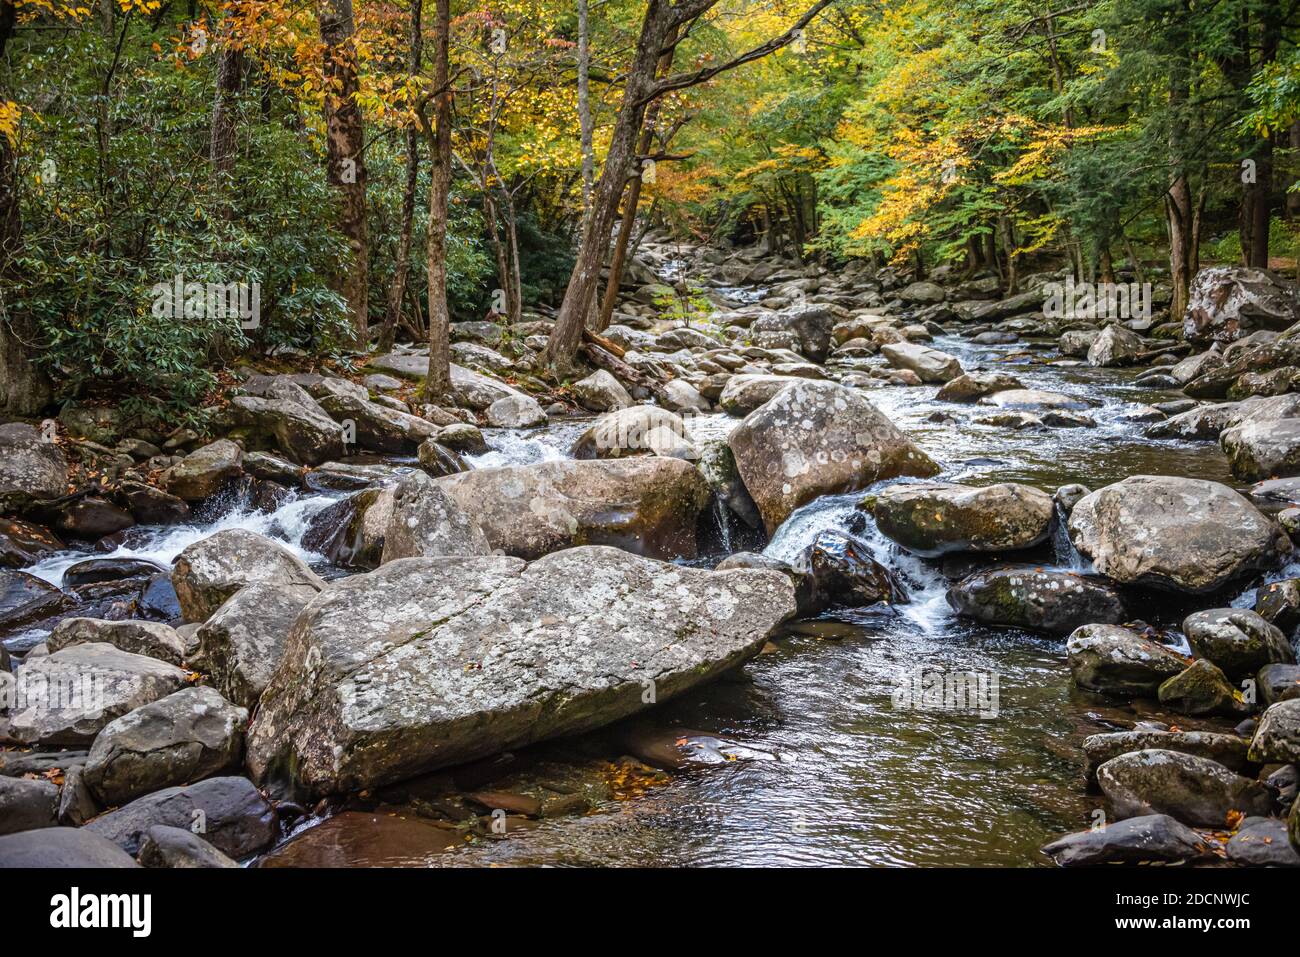 Little Pigeon River at the Chimneys Picnic Area in great Smoky Mountains National Park near Gatlinburg, Tennessee. (USA) Stock Photo